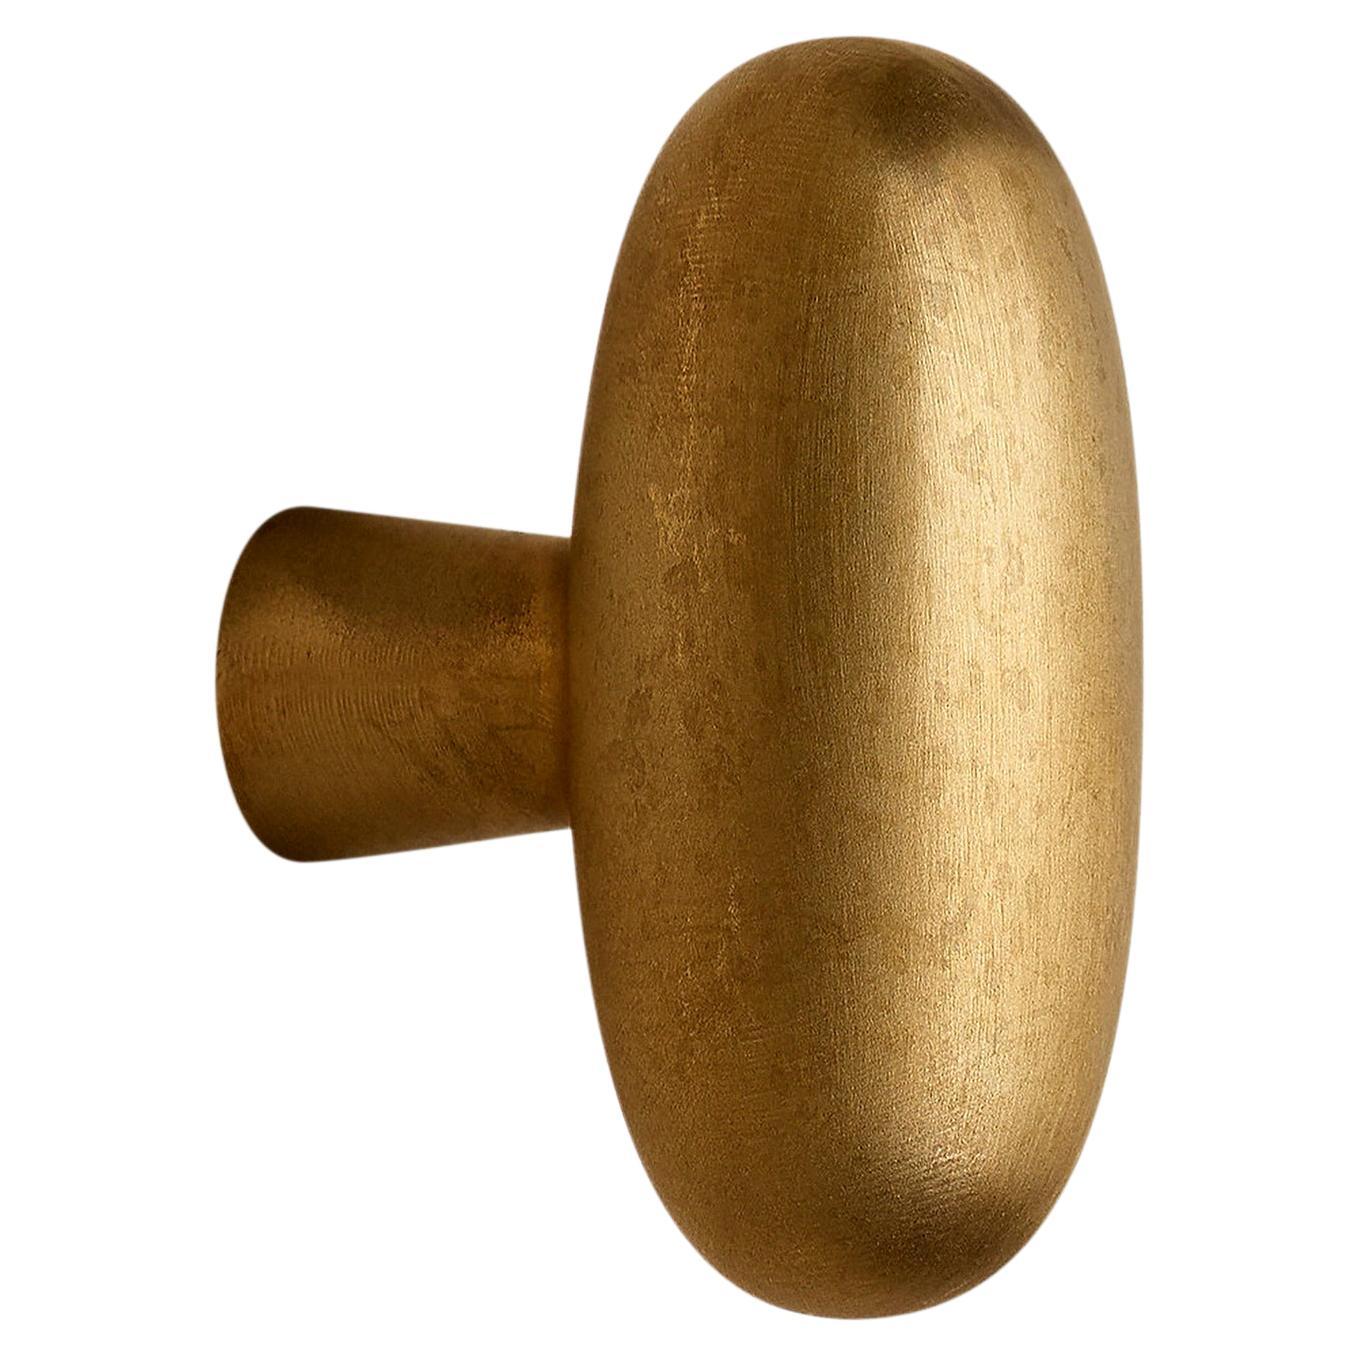 Contemporary Door Handle / Knob 'Blunt' by Spaces Within, Amber Brass